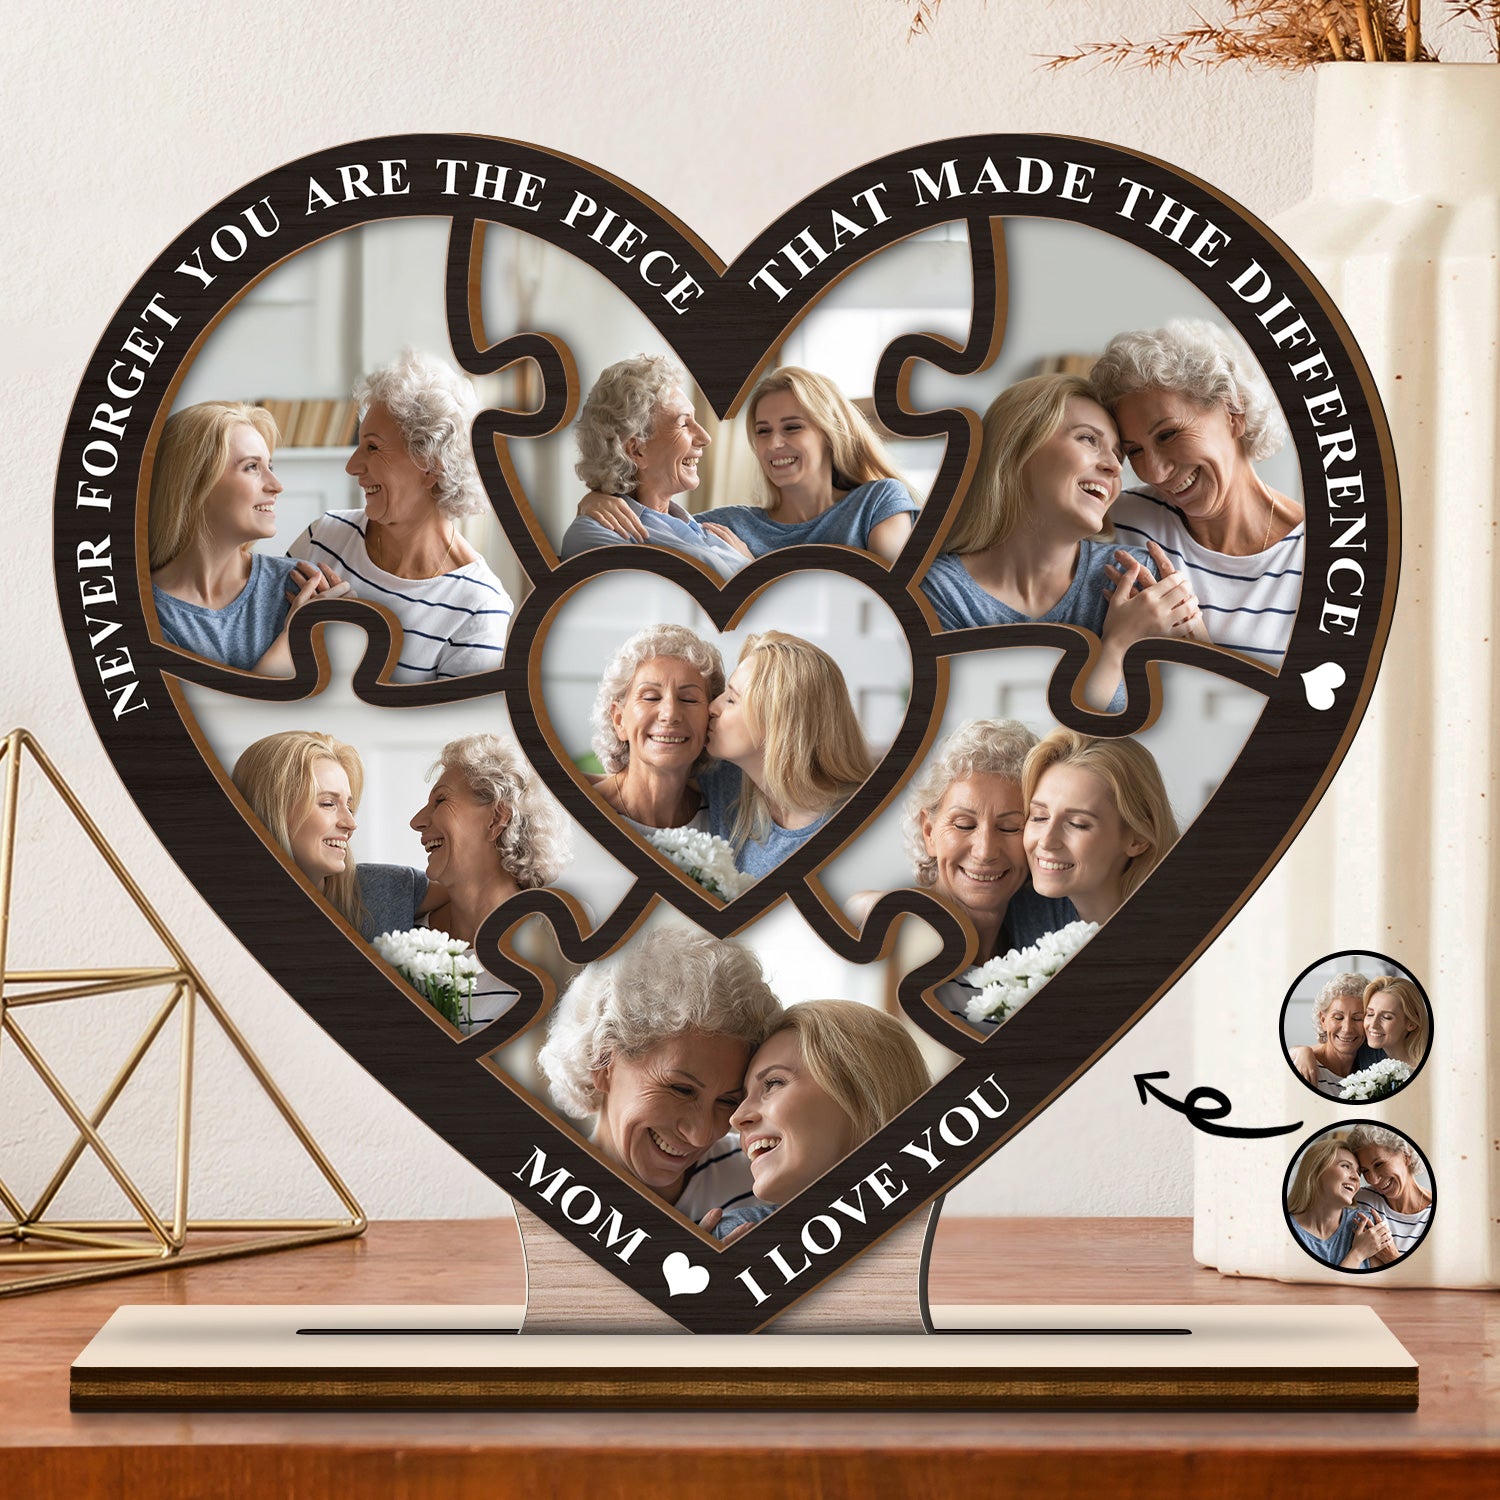 Custom Photo Never Forget That You Are The Piece Made The Difference - Gift For Mom - Personalized Custom Shaped 2-Layered Wooden Plaque